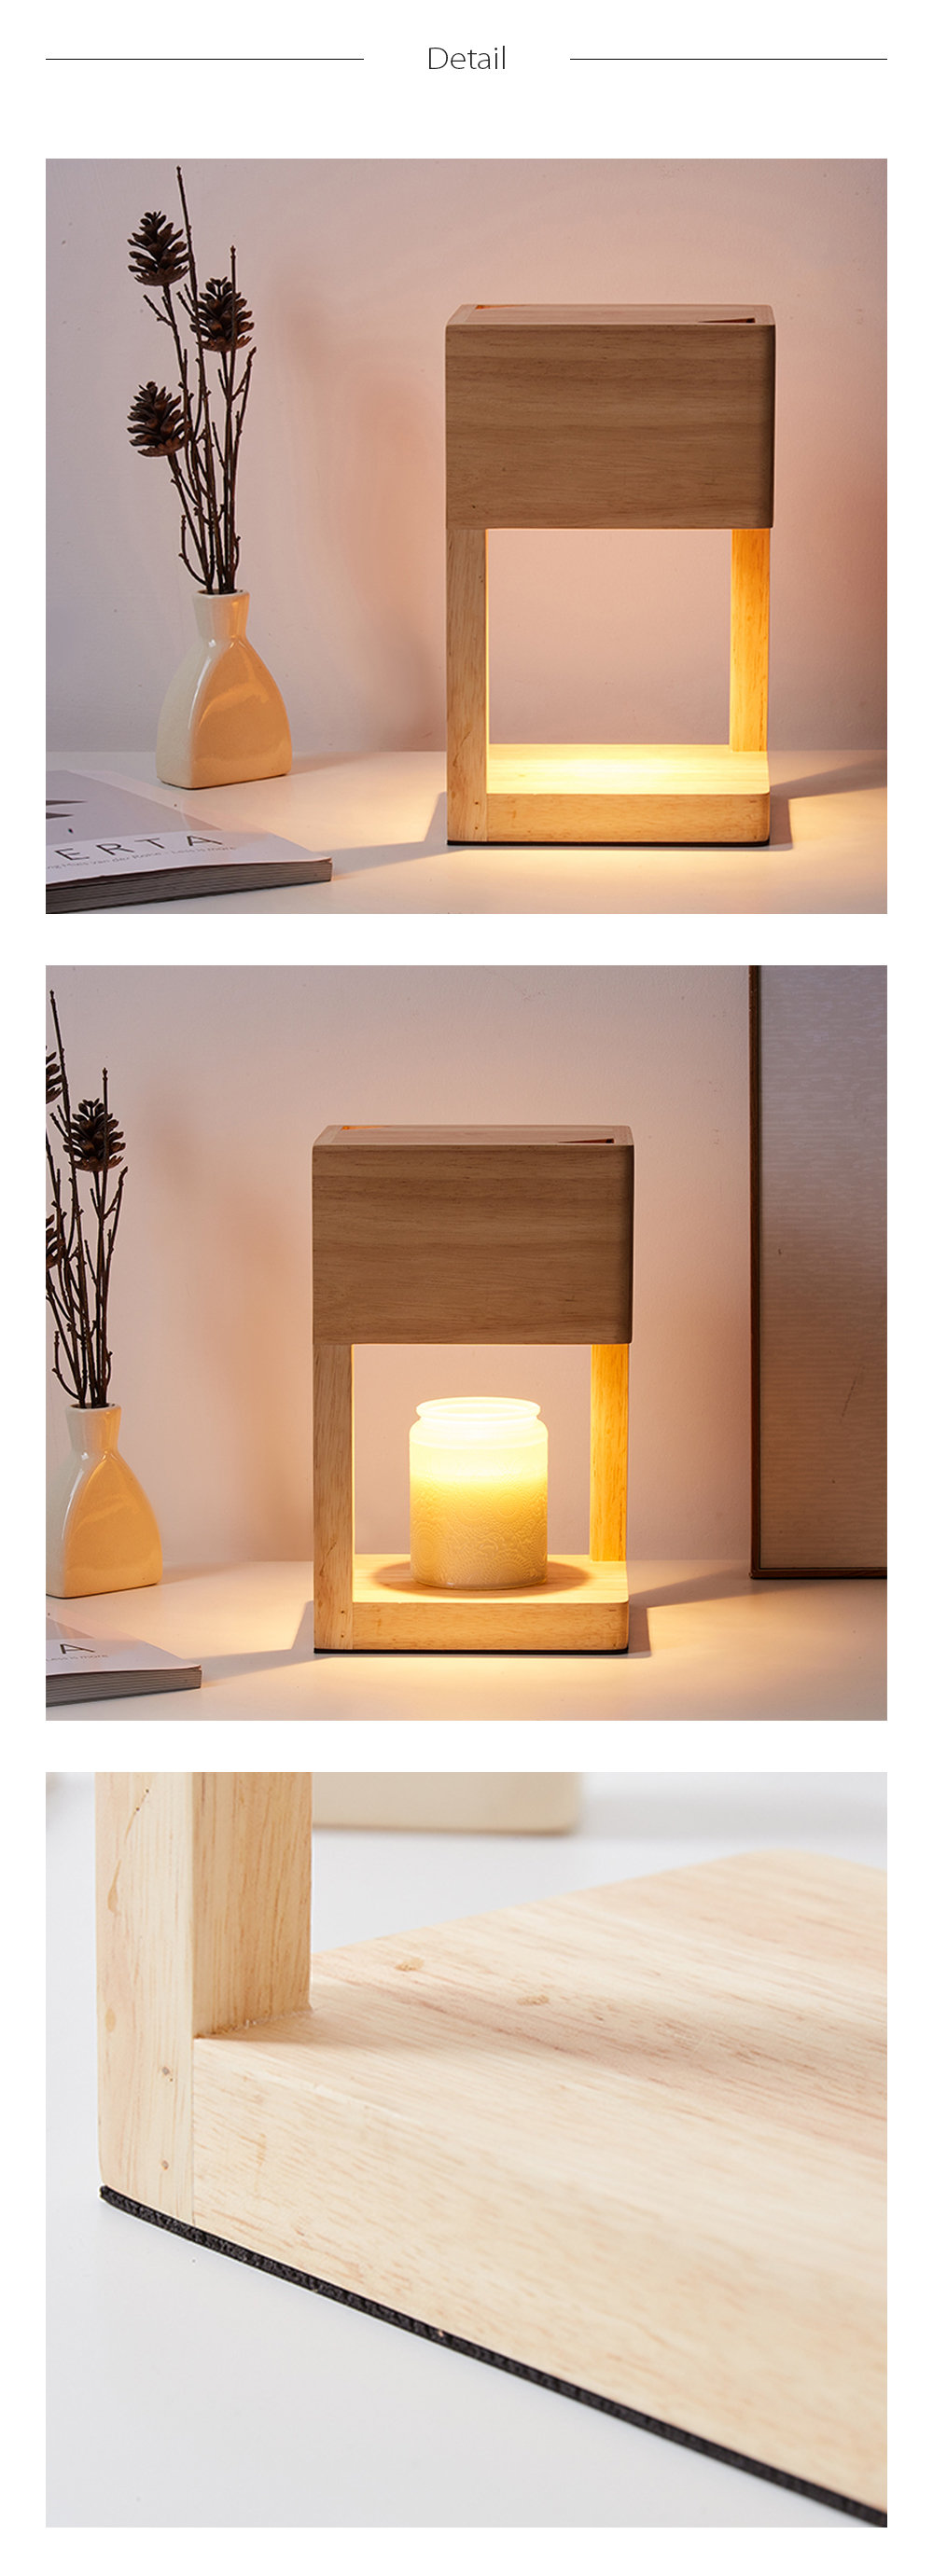 Candle Warmer Lamp - Wood - Black Walnut - 2 Patterns from Apollo Box